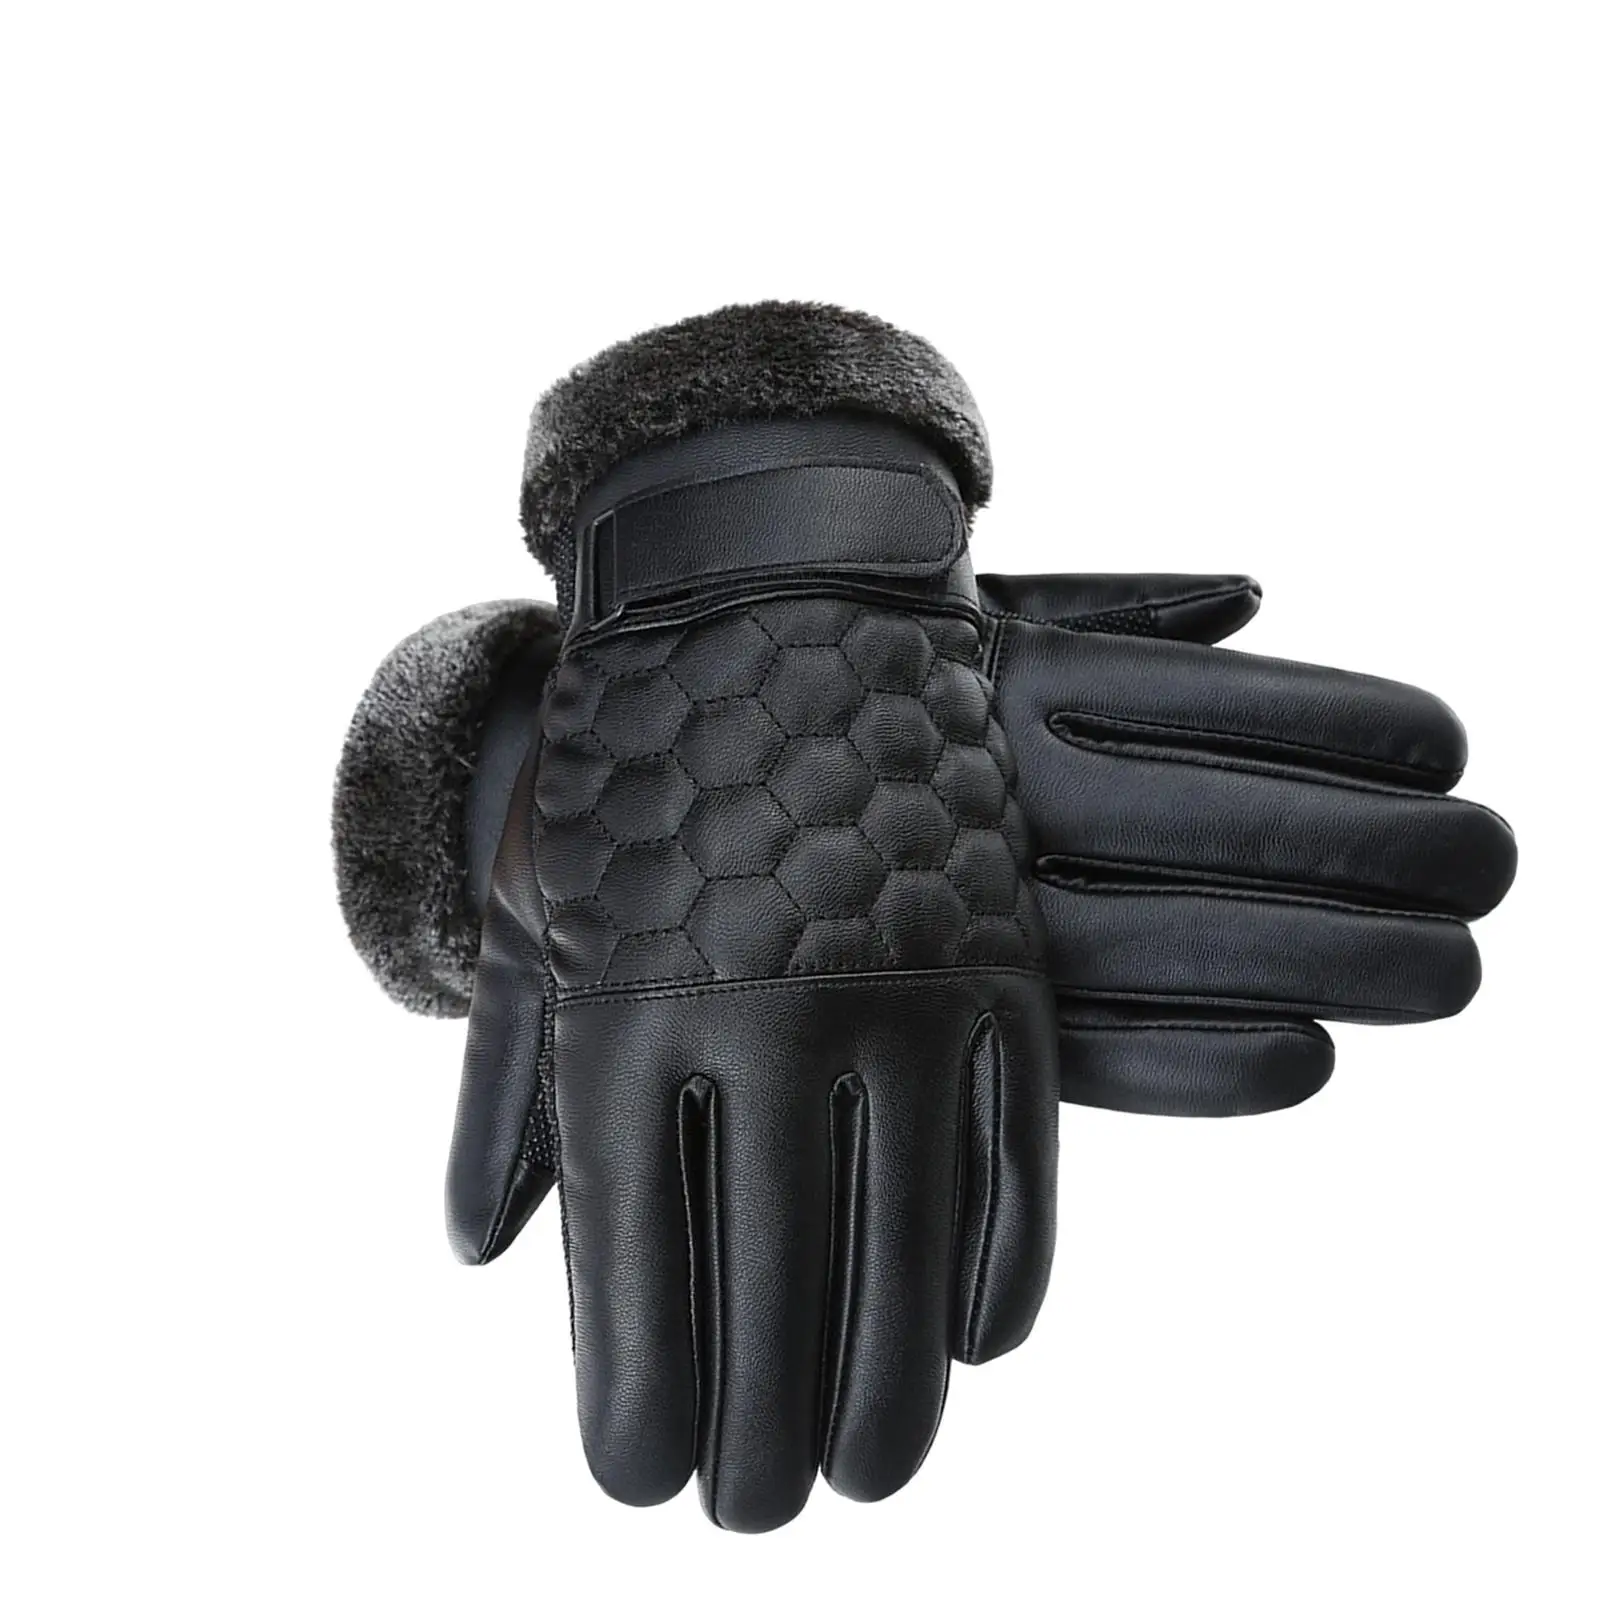 Winter Gloves Waterproof Comfortable Warm Gloves for Typing Cycling Biking